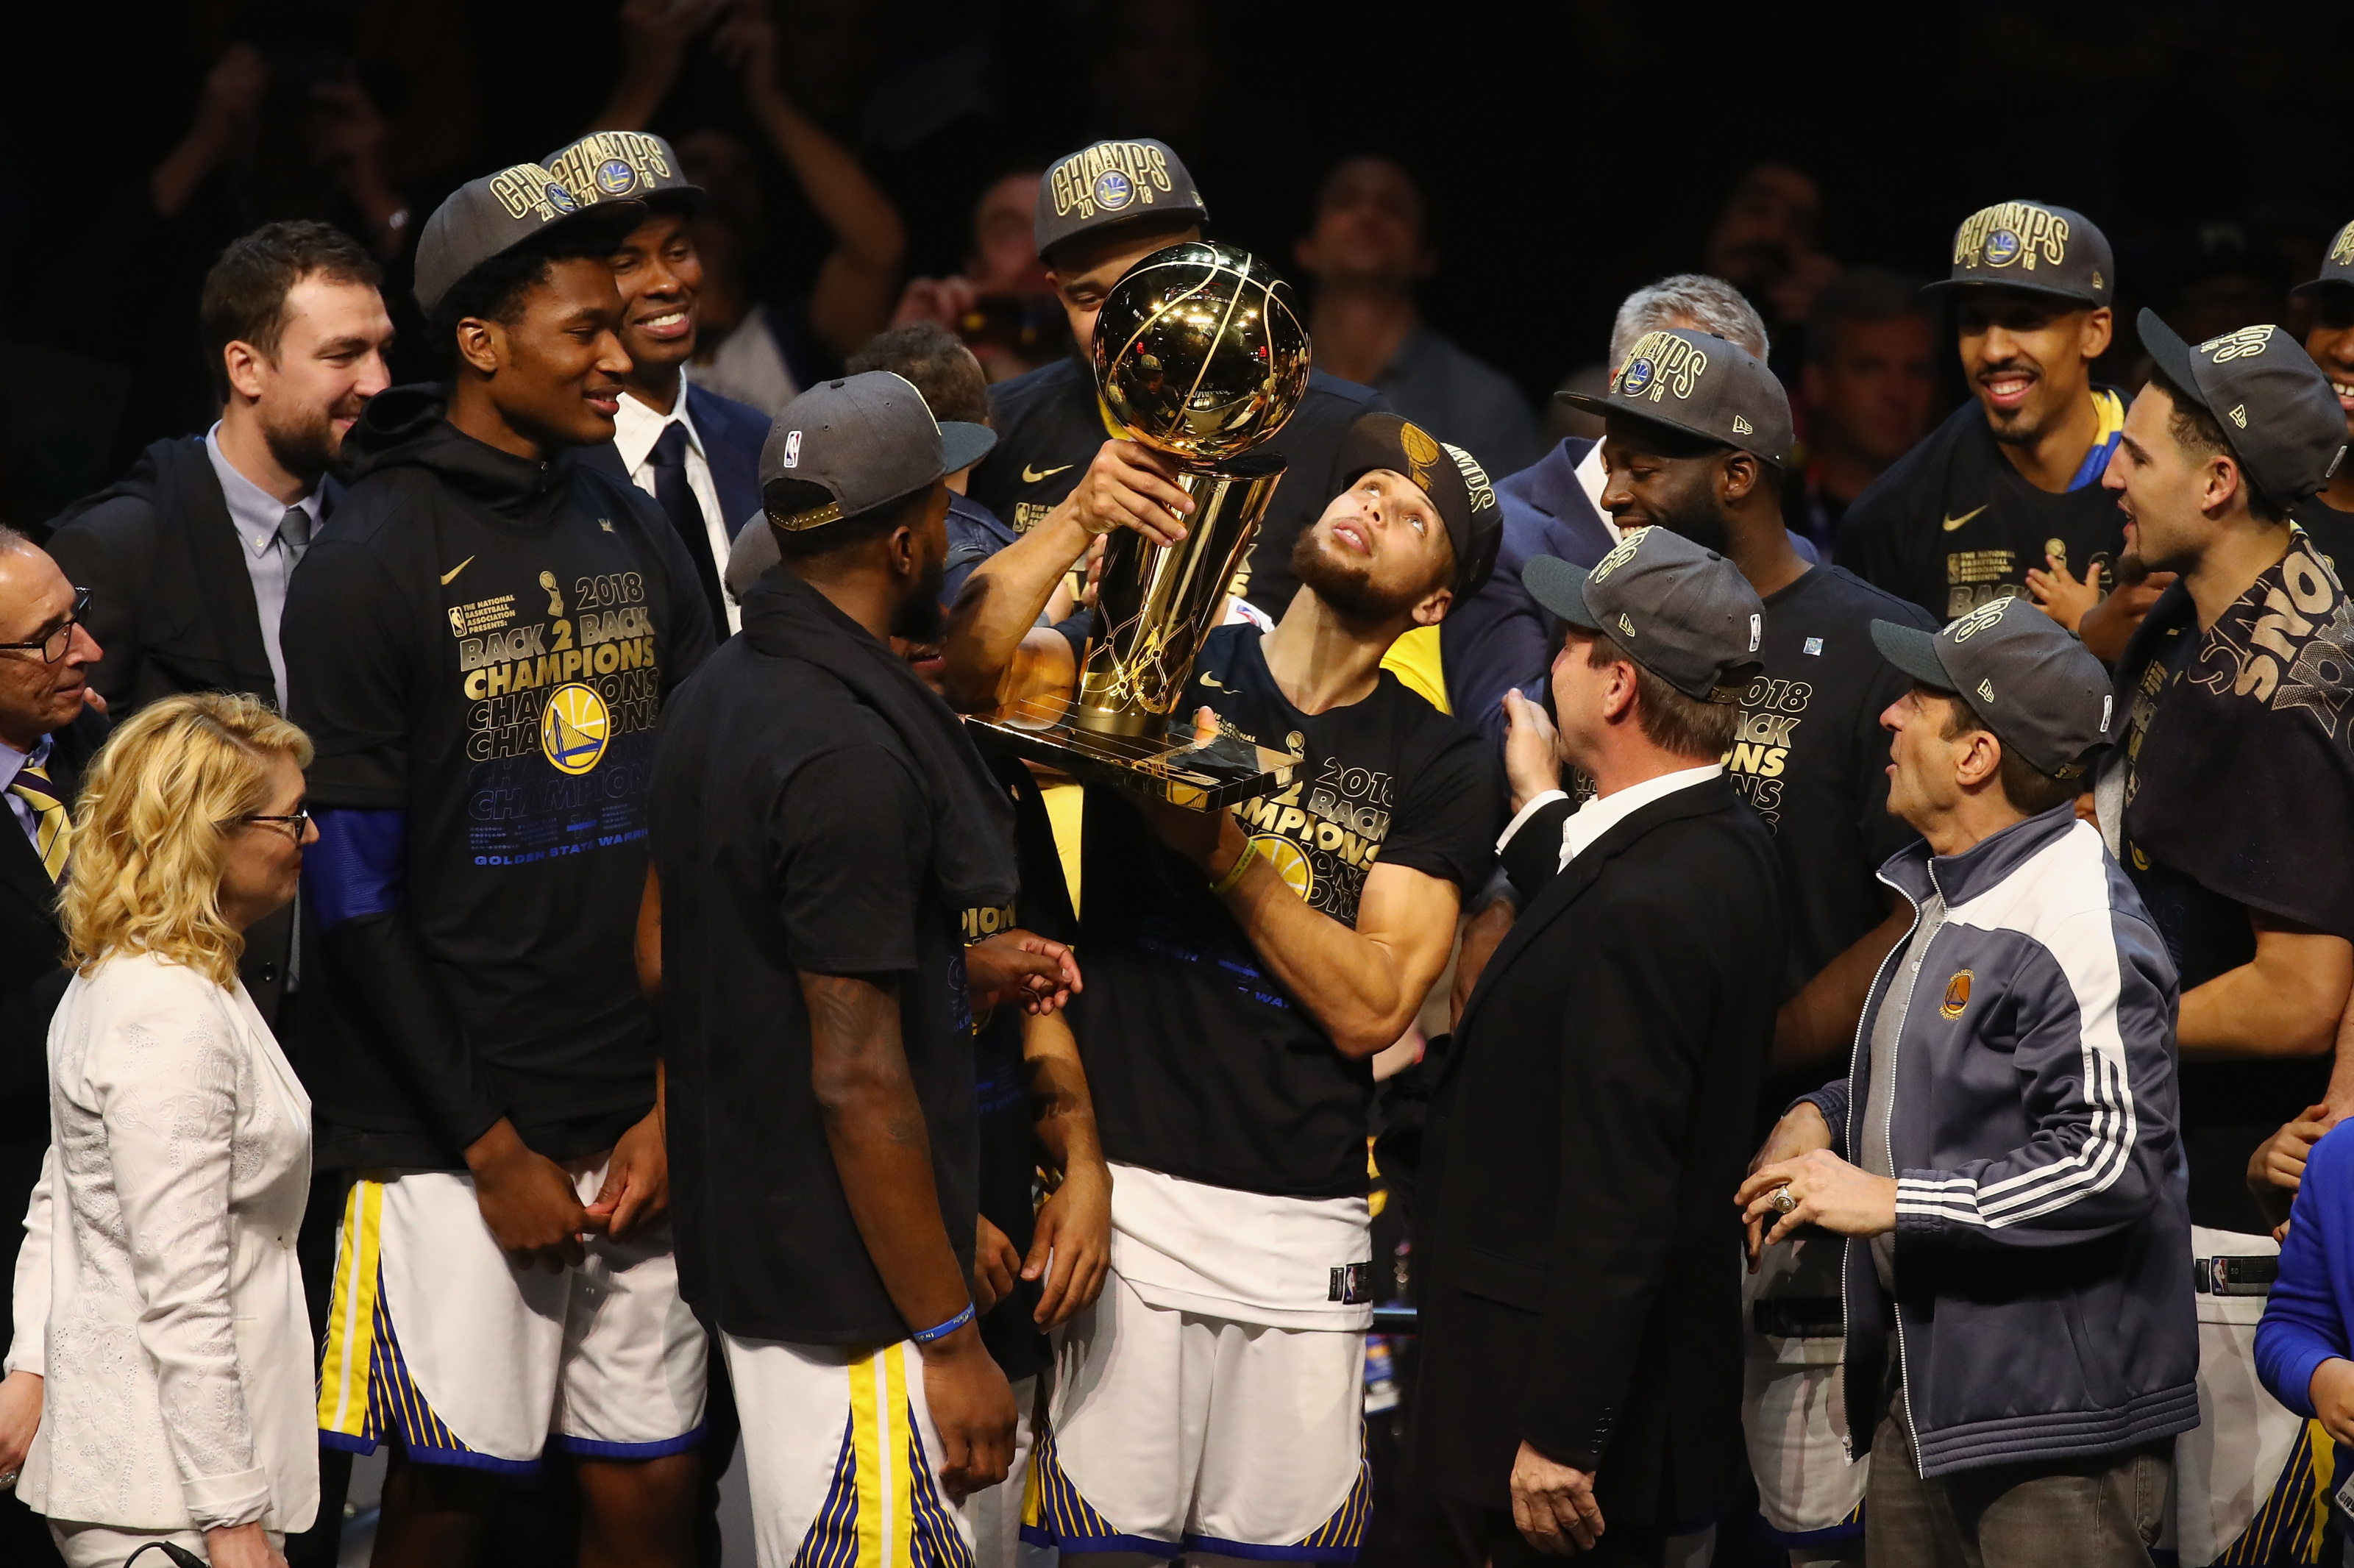 Champions again: Golden State Warriors fans bask in NBA Finals